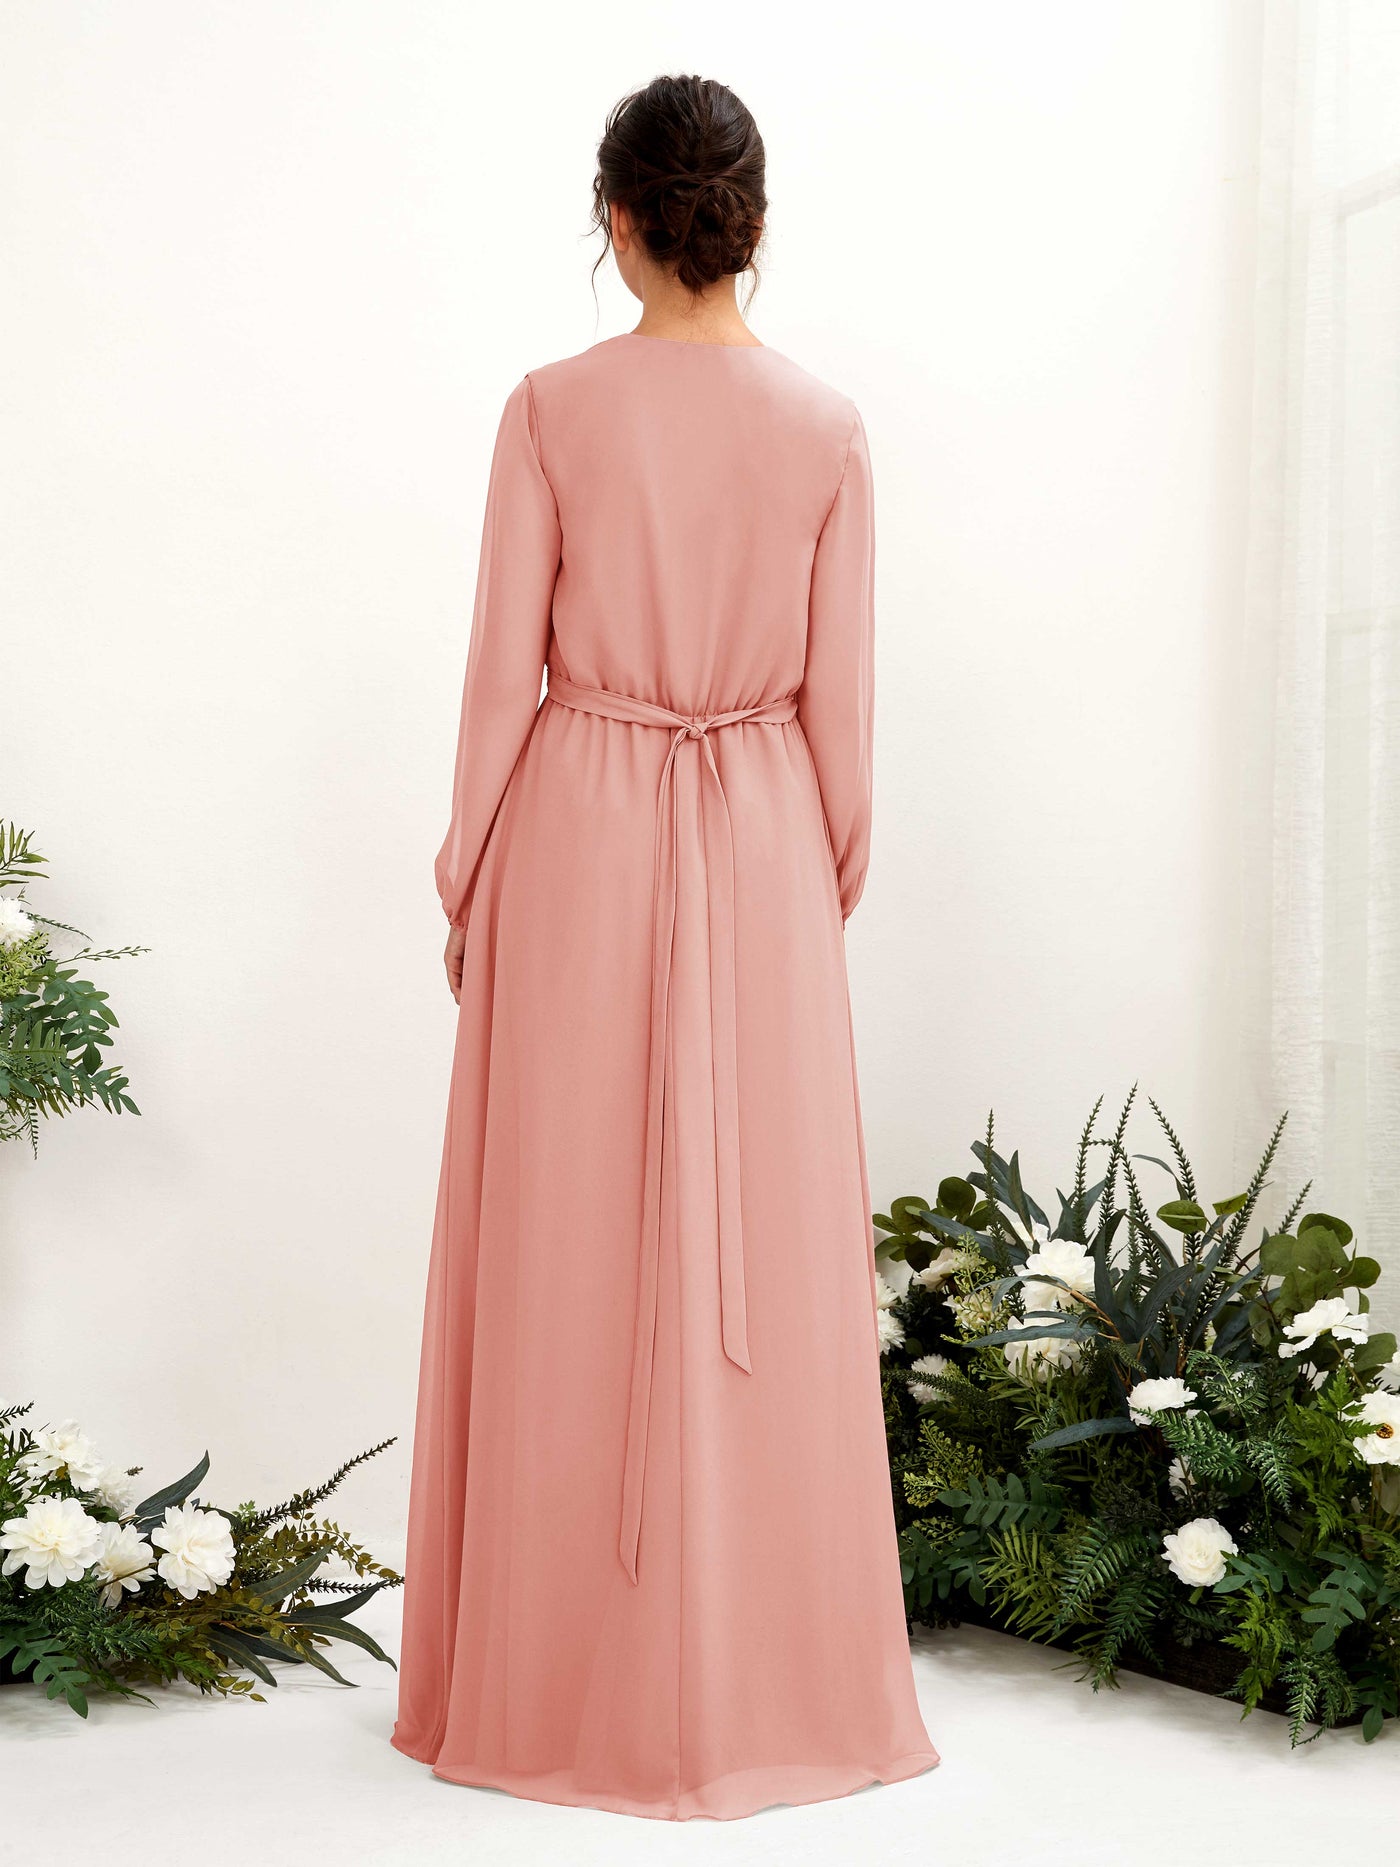 Champagne Rose Bridesmaid Dresses Bridesmaid Dress A-line Chiffon V-neck Full Length Long Sleeves Wedding Party Dress (81223206)#color_champagne-rose